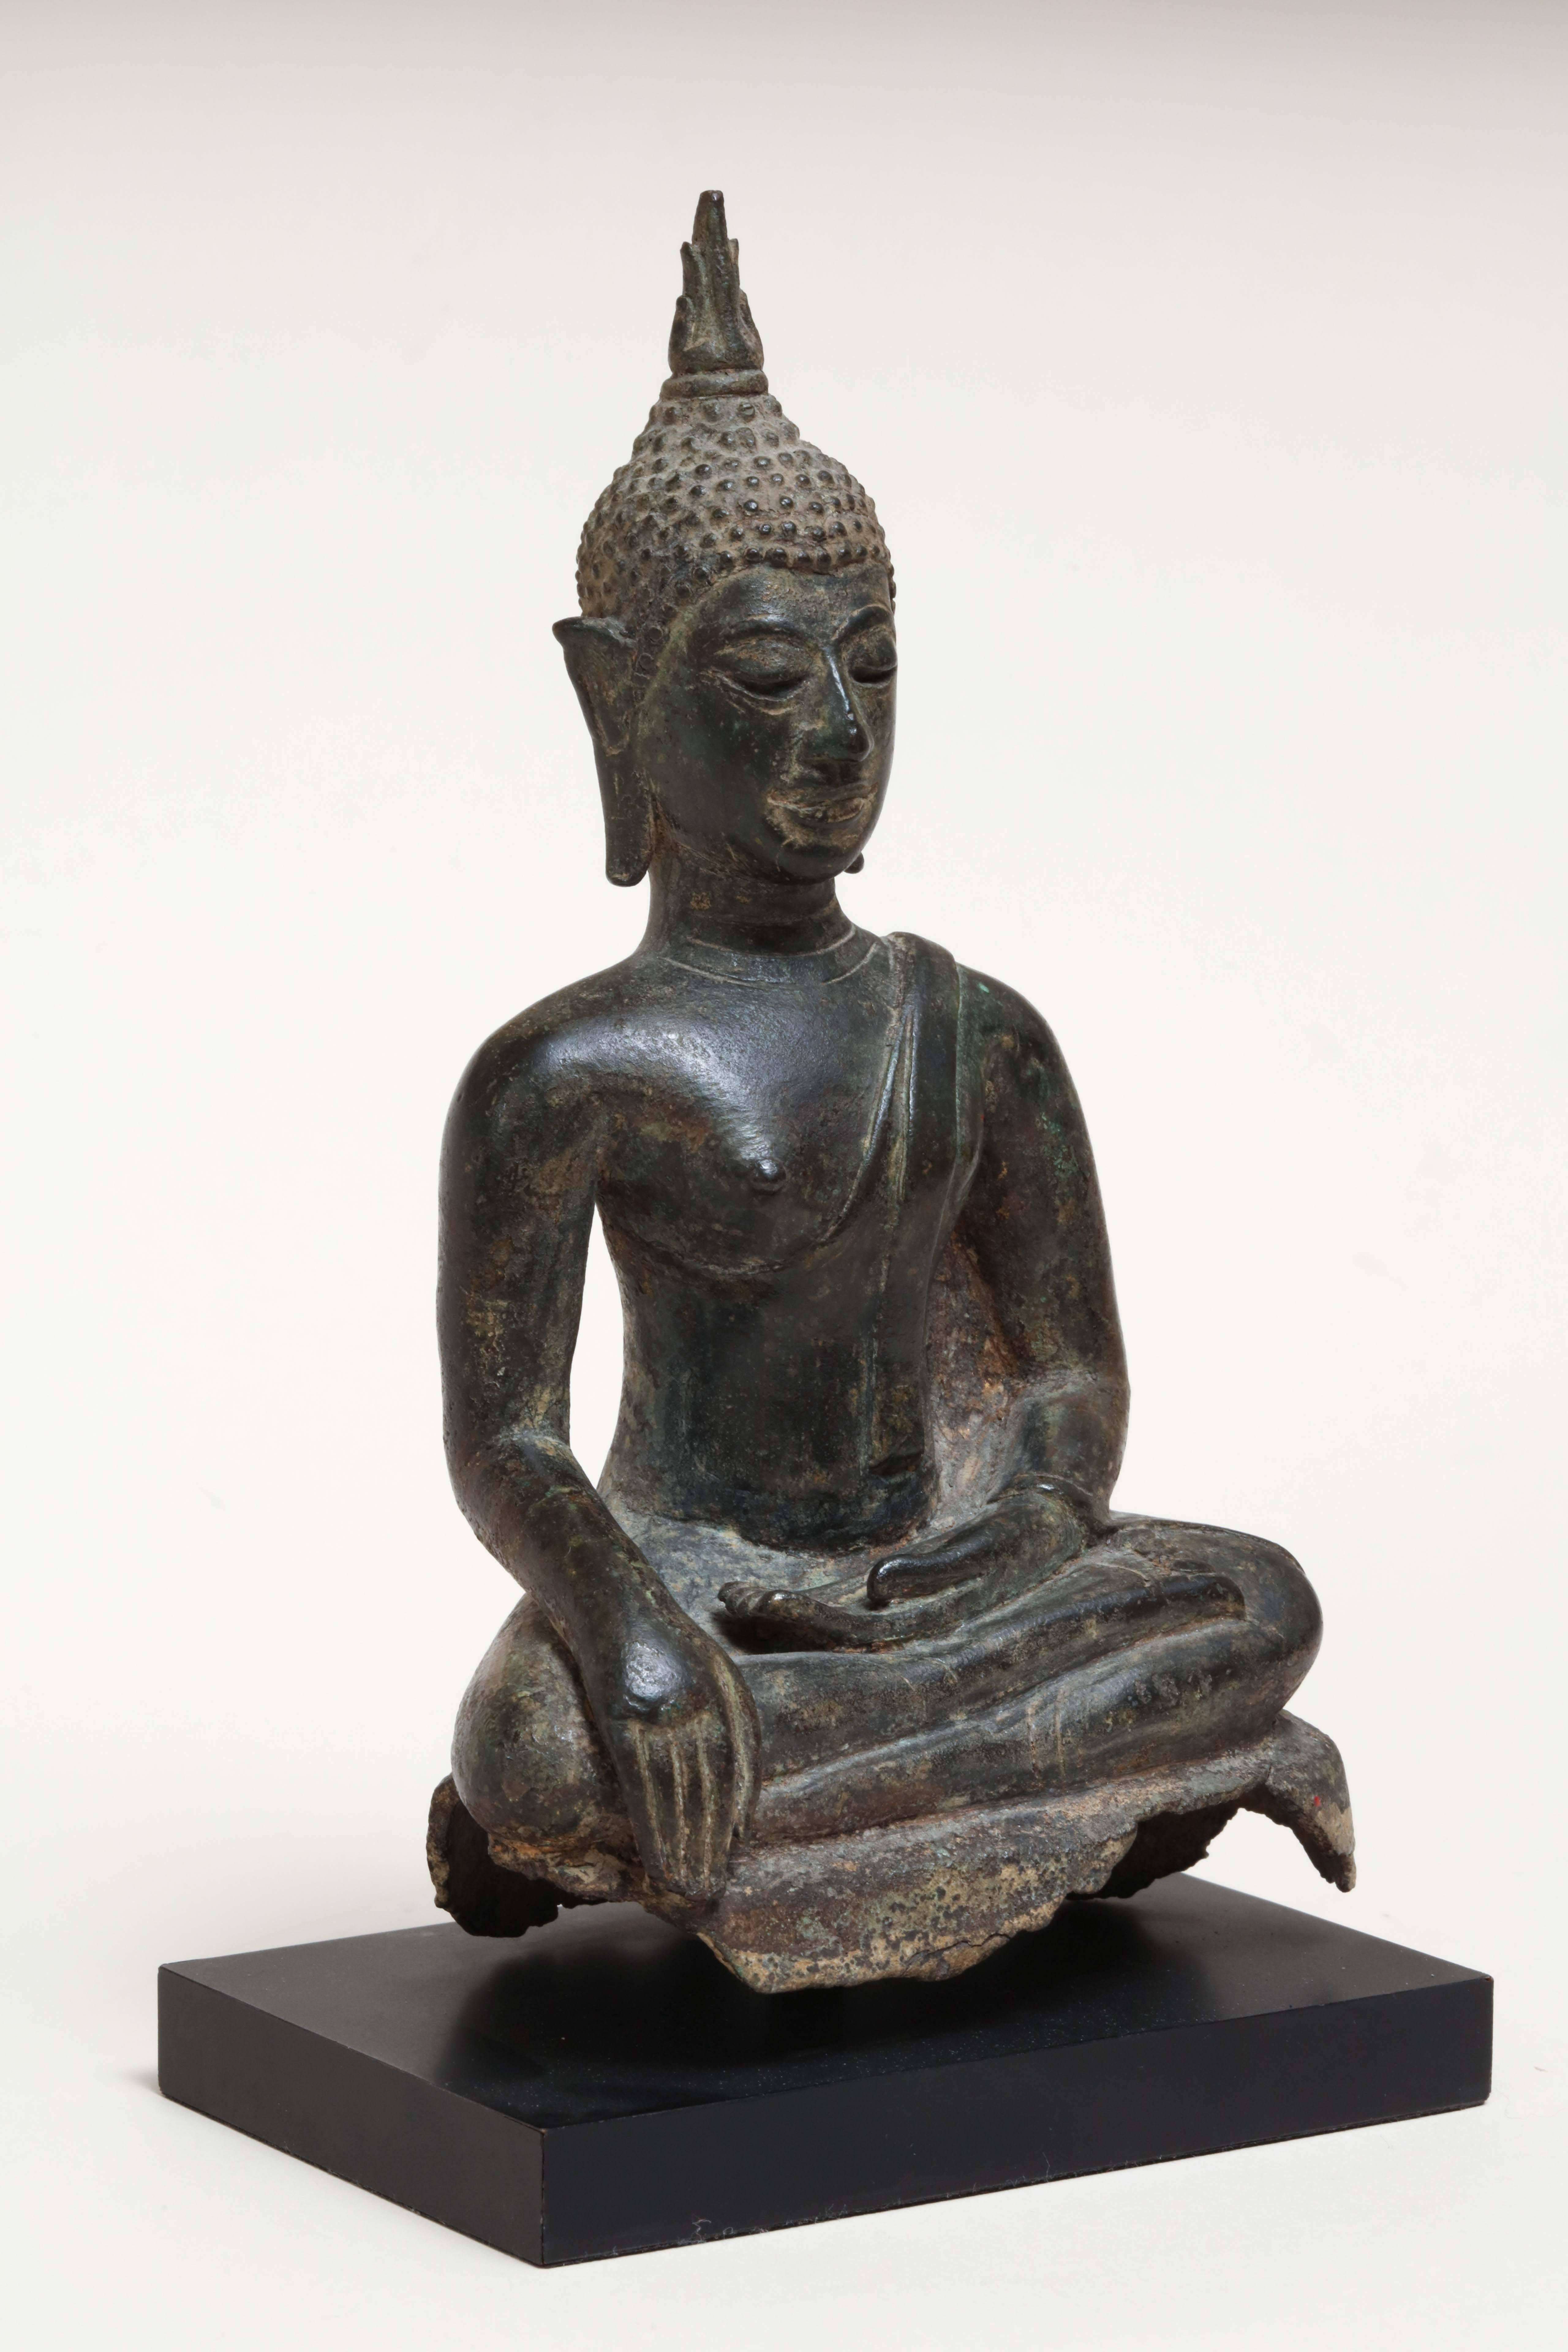 Measures: 8 ¼” high with stand; 4 1/8” wide; 2 ½” deep.
Stand: 4 7/8” wide; 3 3/16” deep; ½” high.

Matte finish on black stand.
Very good condition.

The Buddha is in position Bhumisparsha Mudra. In this position the right hand is resting on